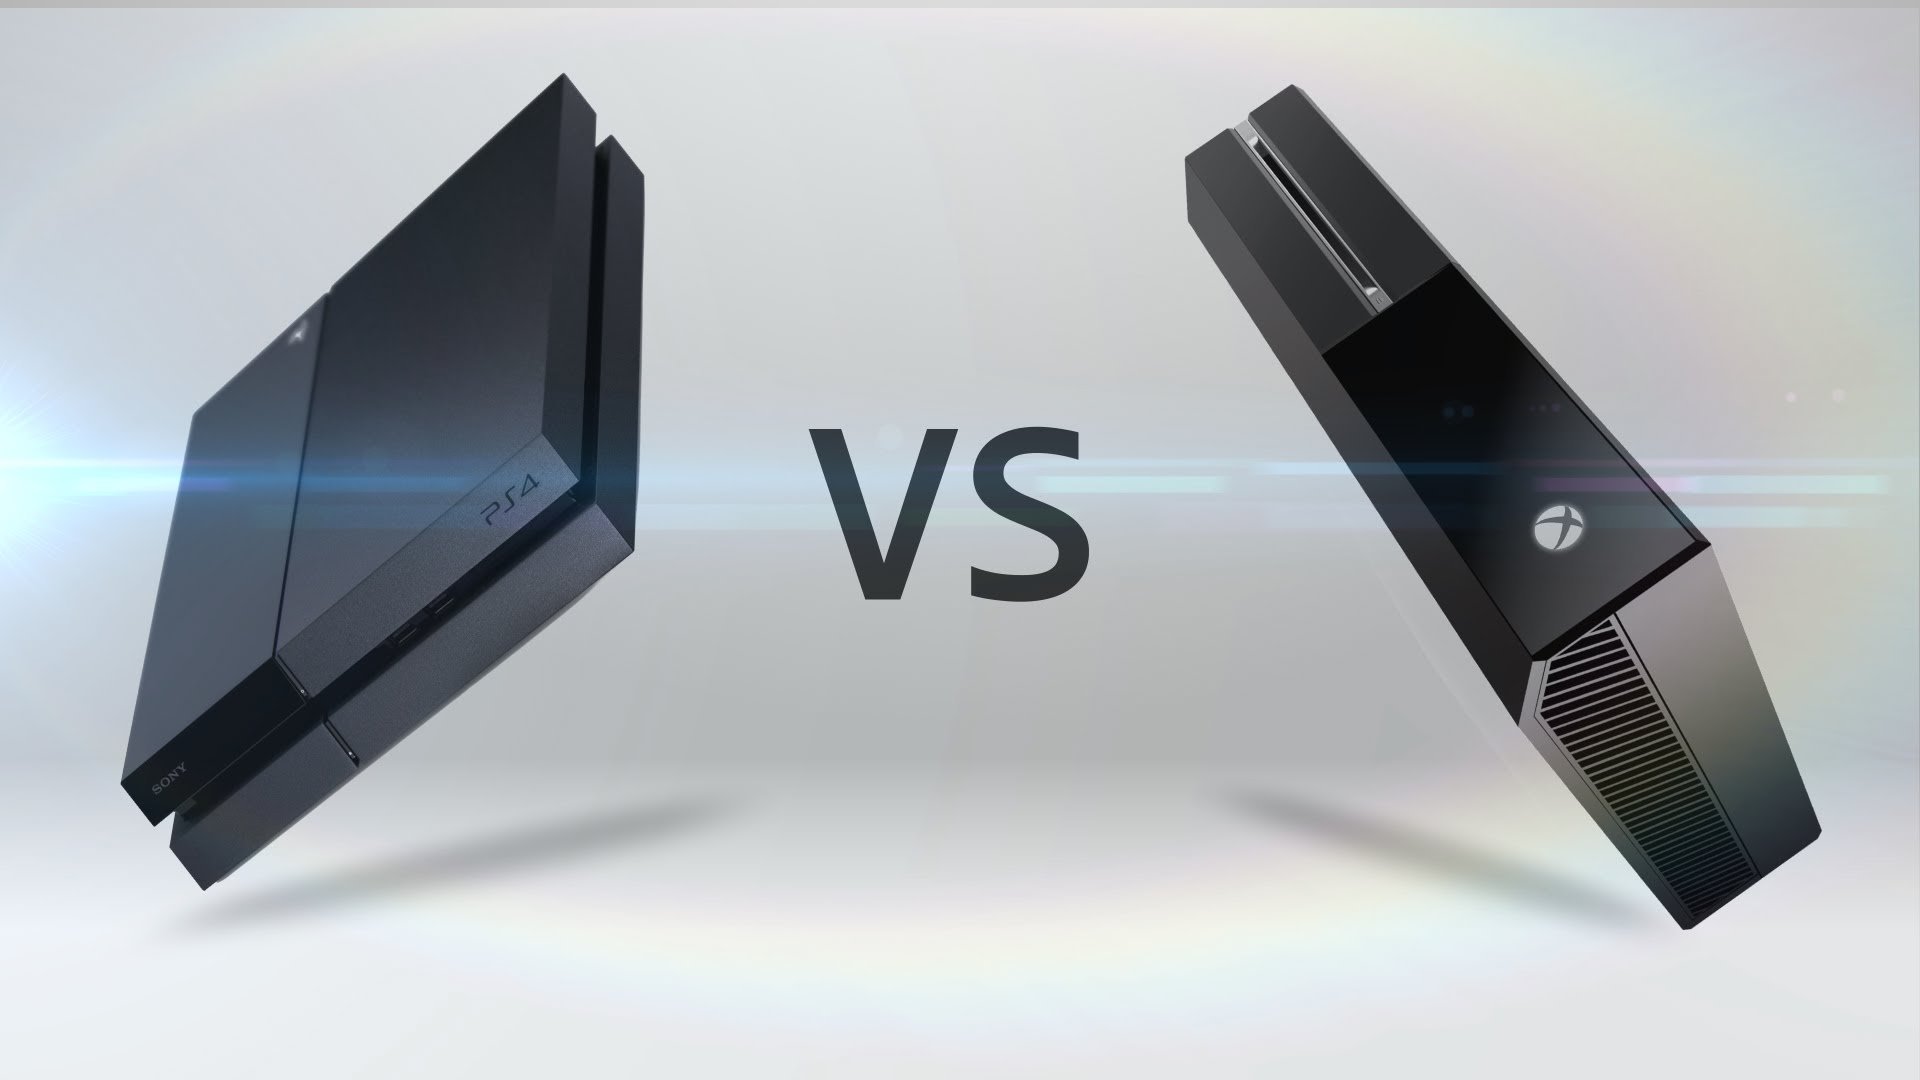 PS4 vs. XBOX One: Which Will Win in 2016?